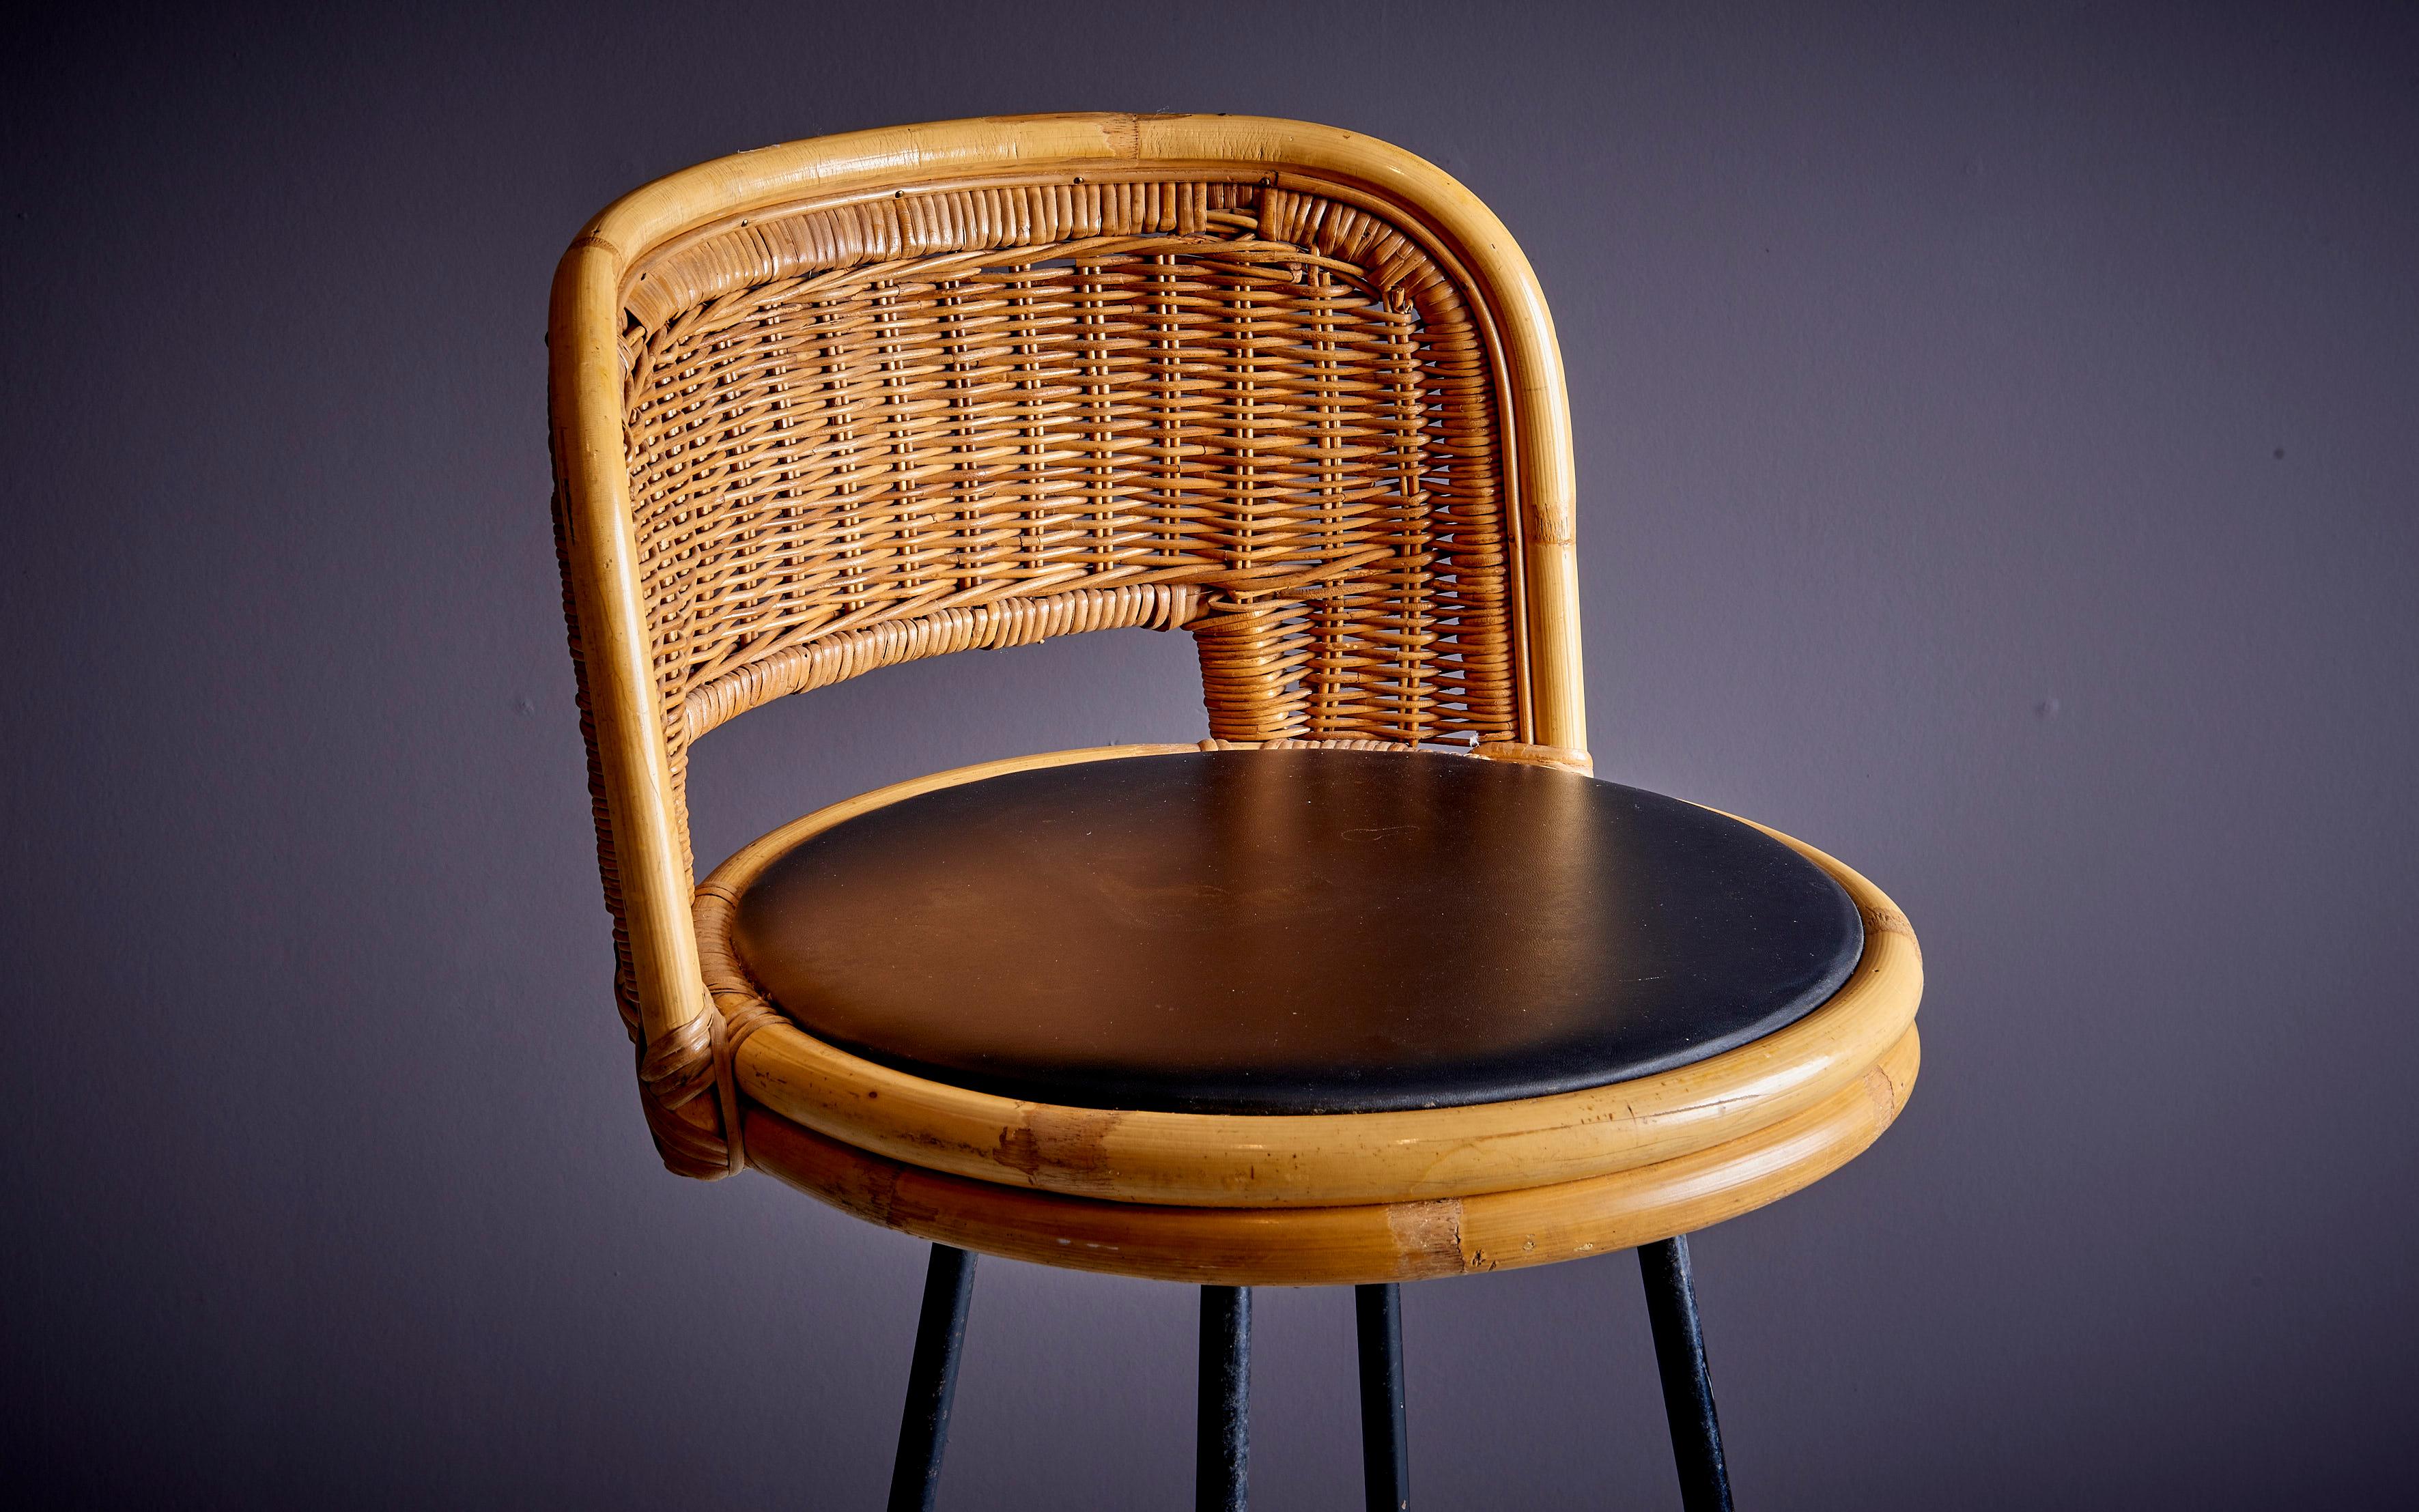 bar stool designed by Danny Ho Fong with wrought iron base and wicker/bamboo seat. The diameter given applies to the diameter of the seat. The base of the stool measures ⌀42cm. 